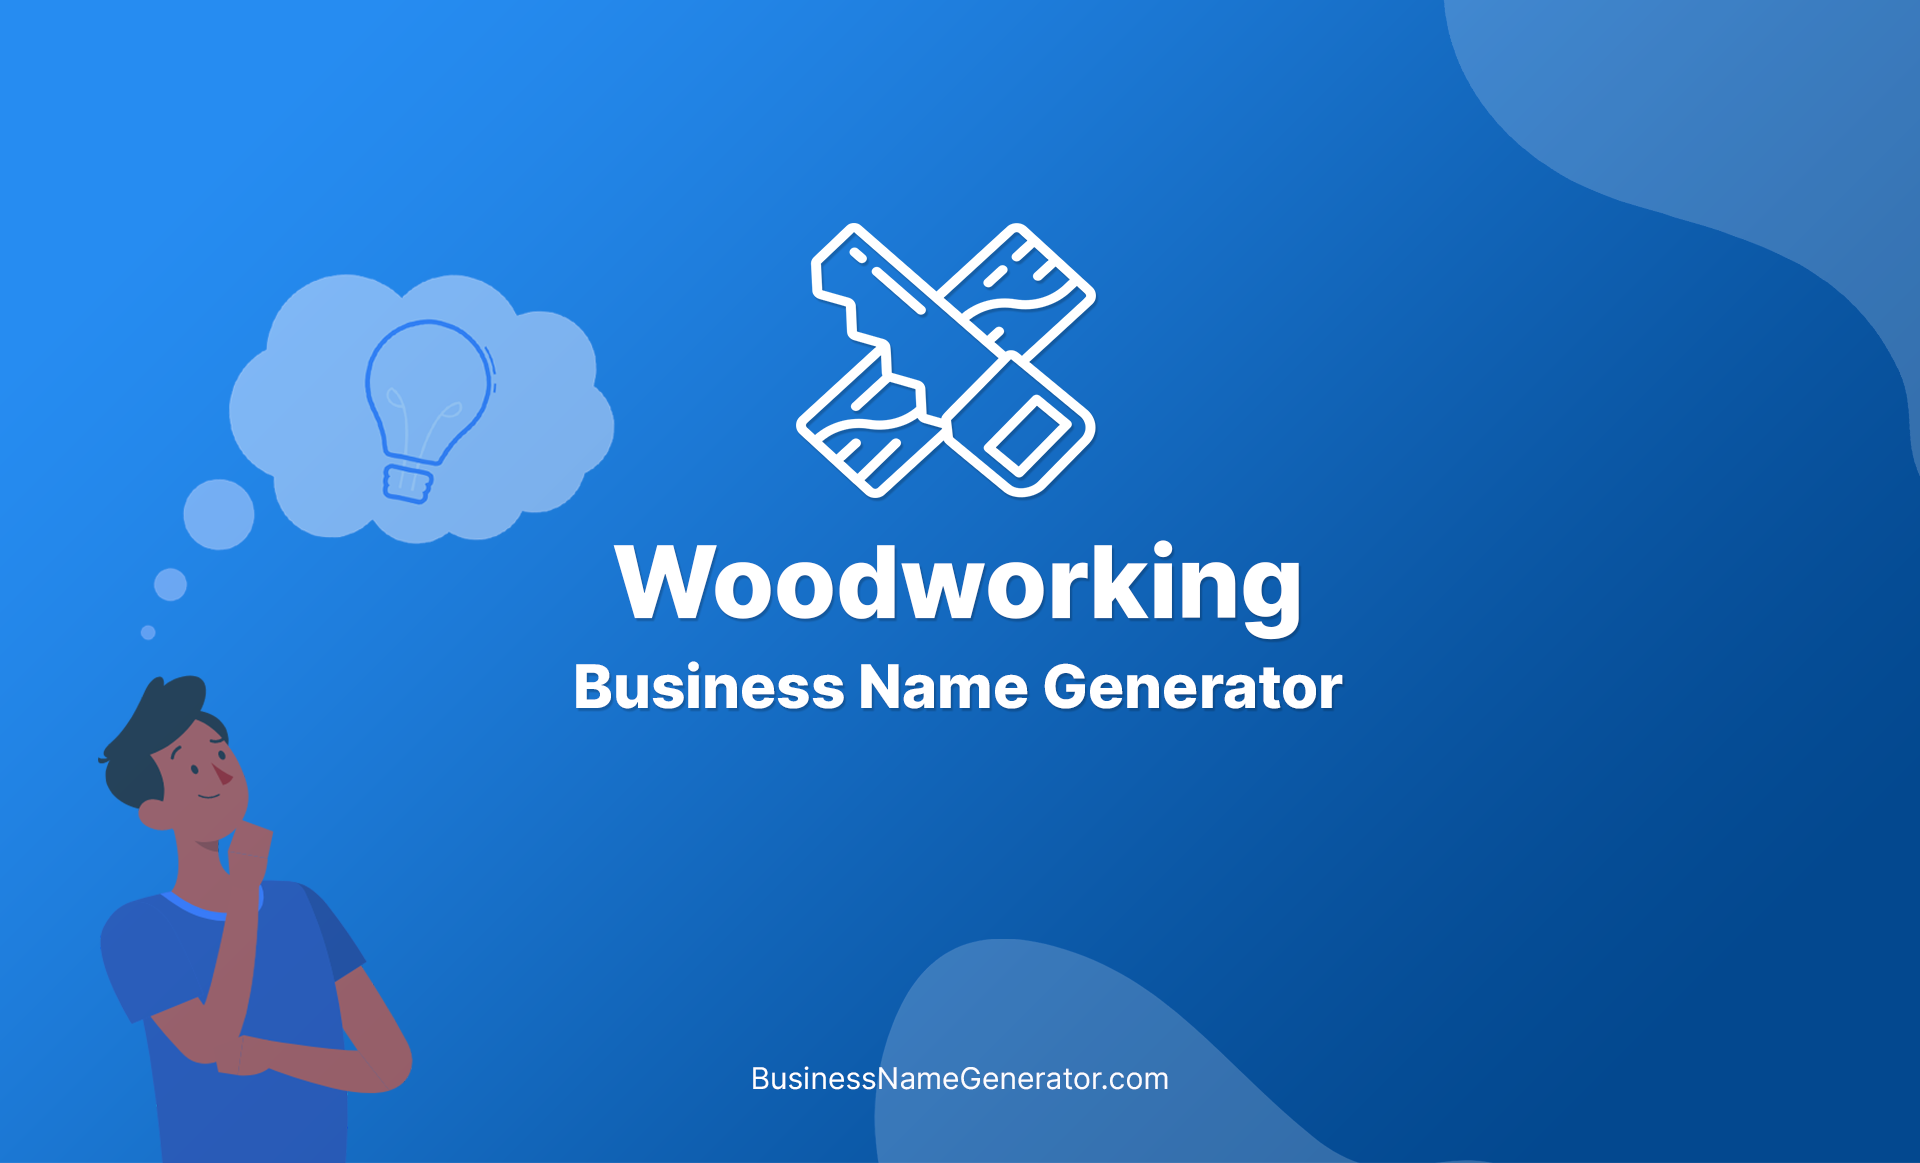 Woodworking Business Name Generator